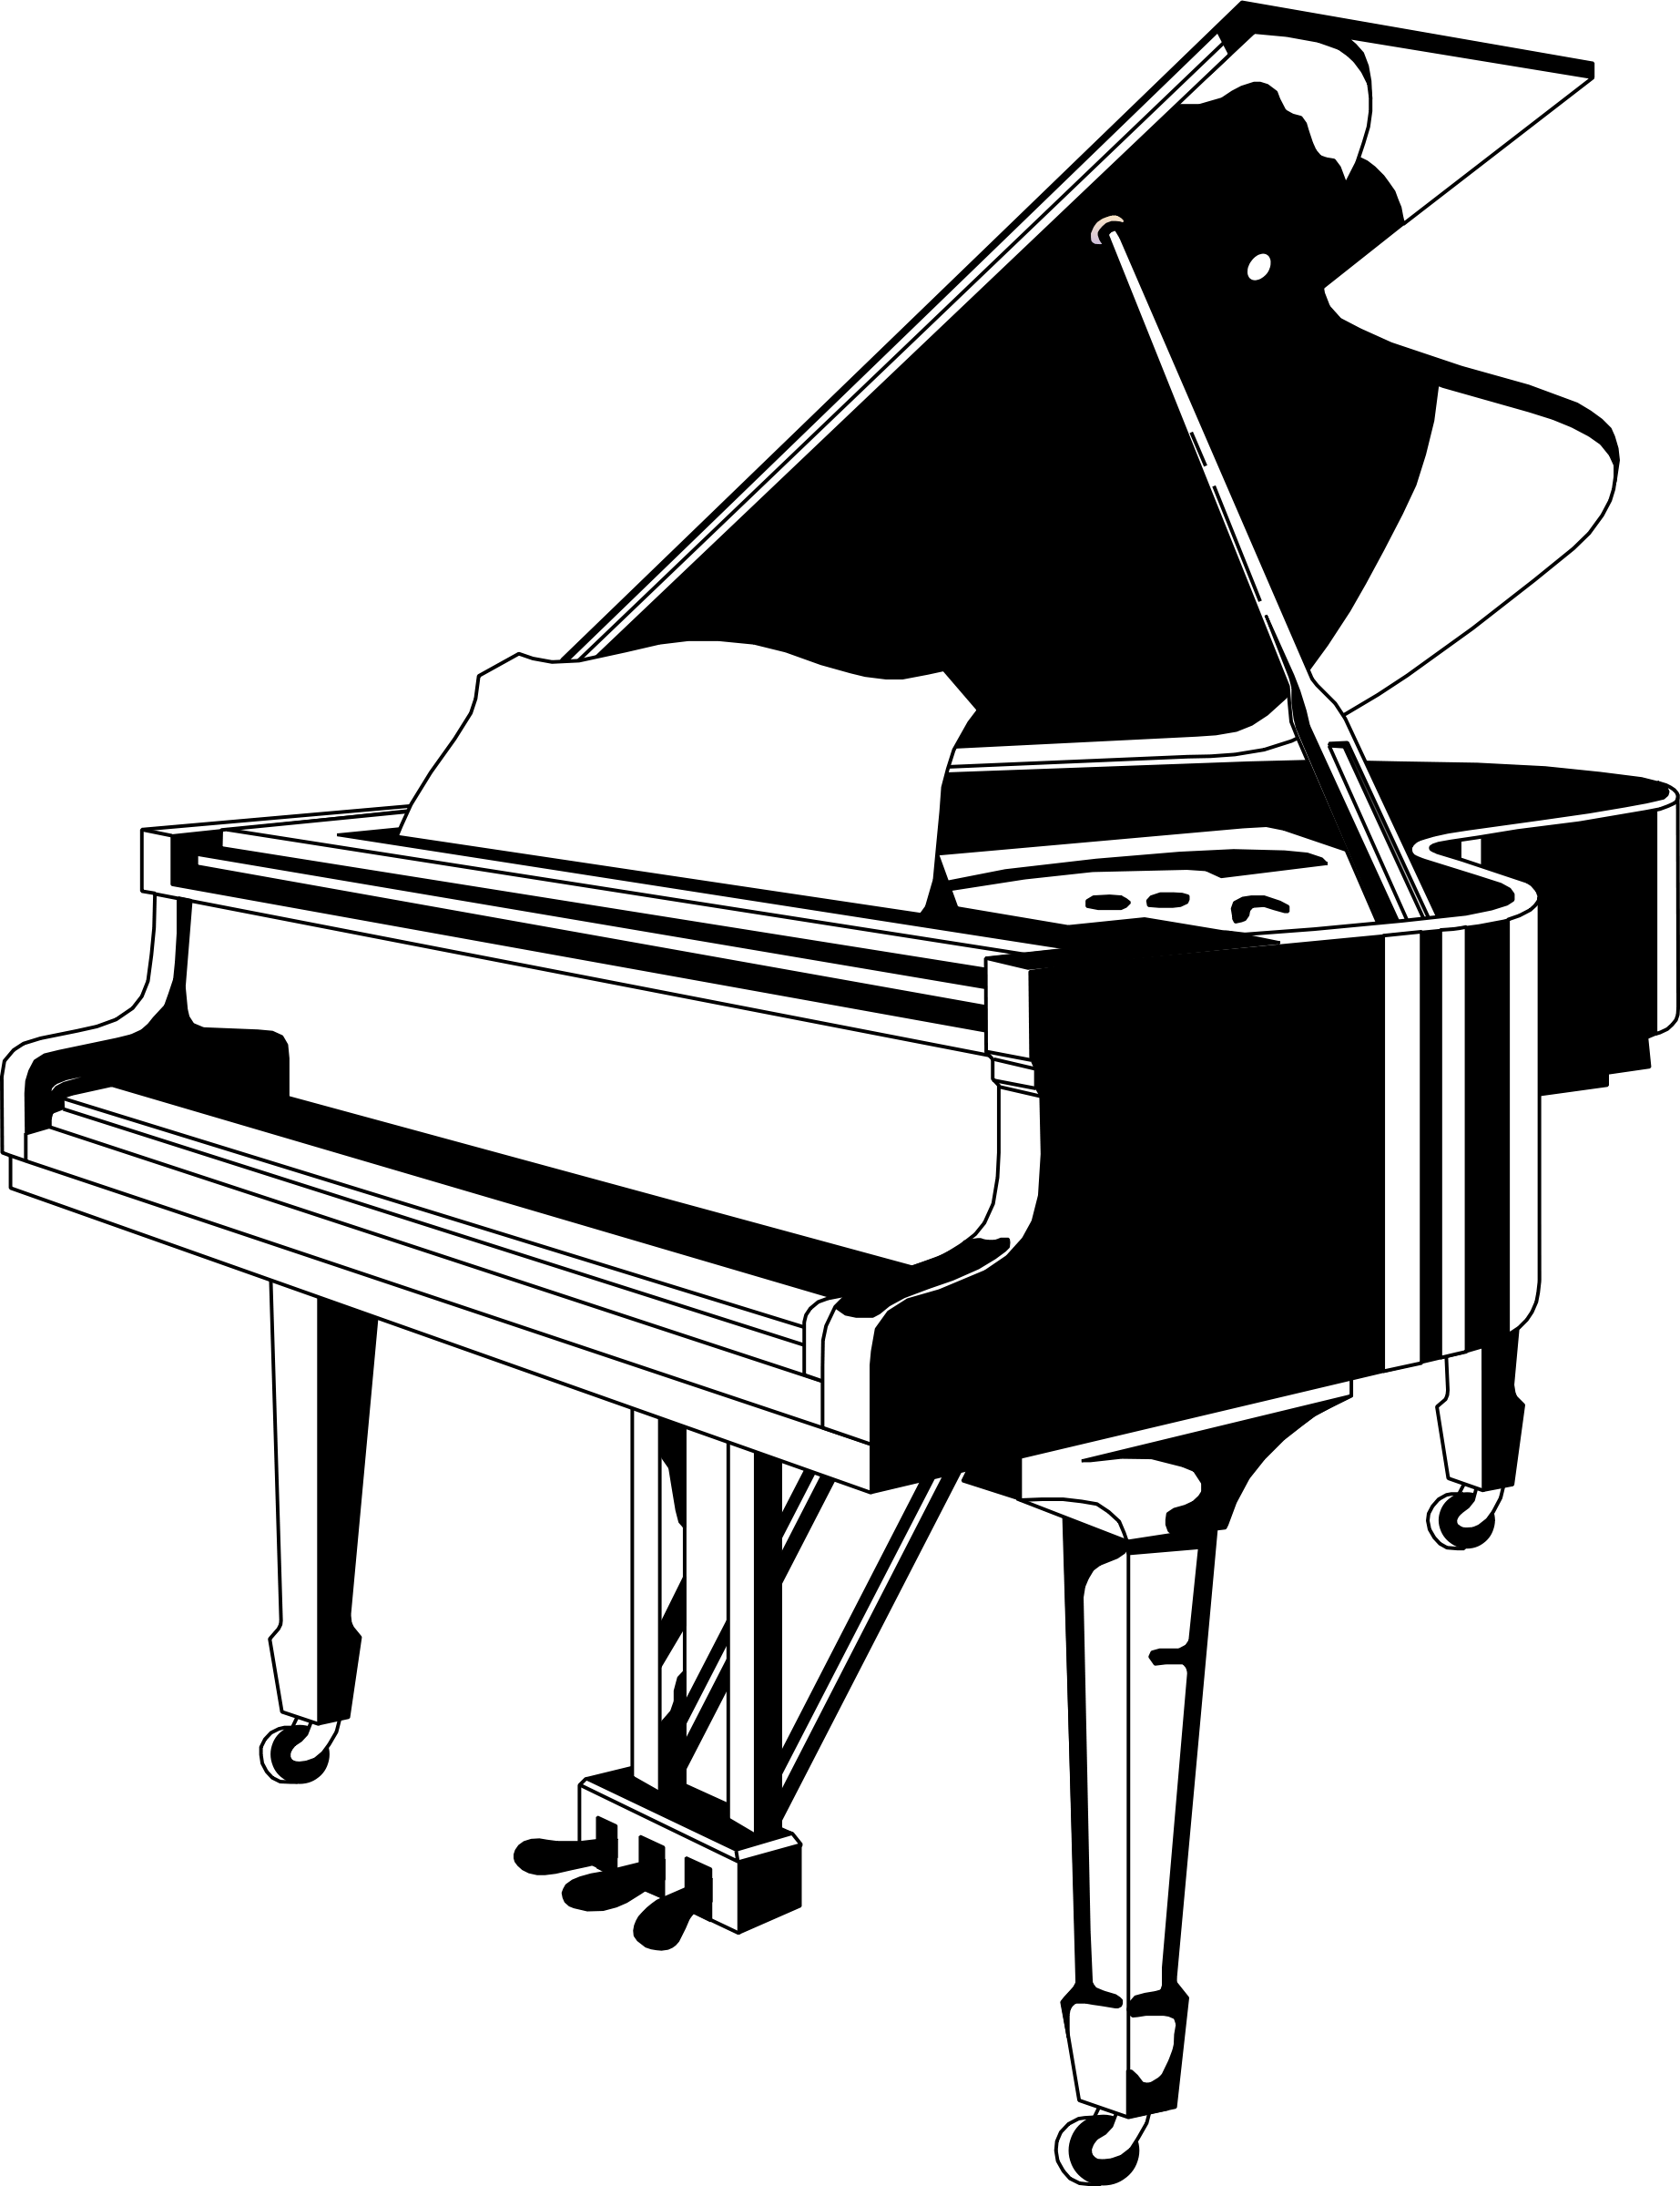 Free Piano Clipart Black And White, Download Free Clip Art.